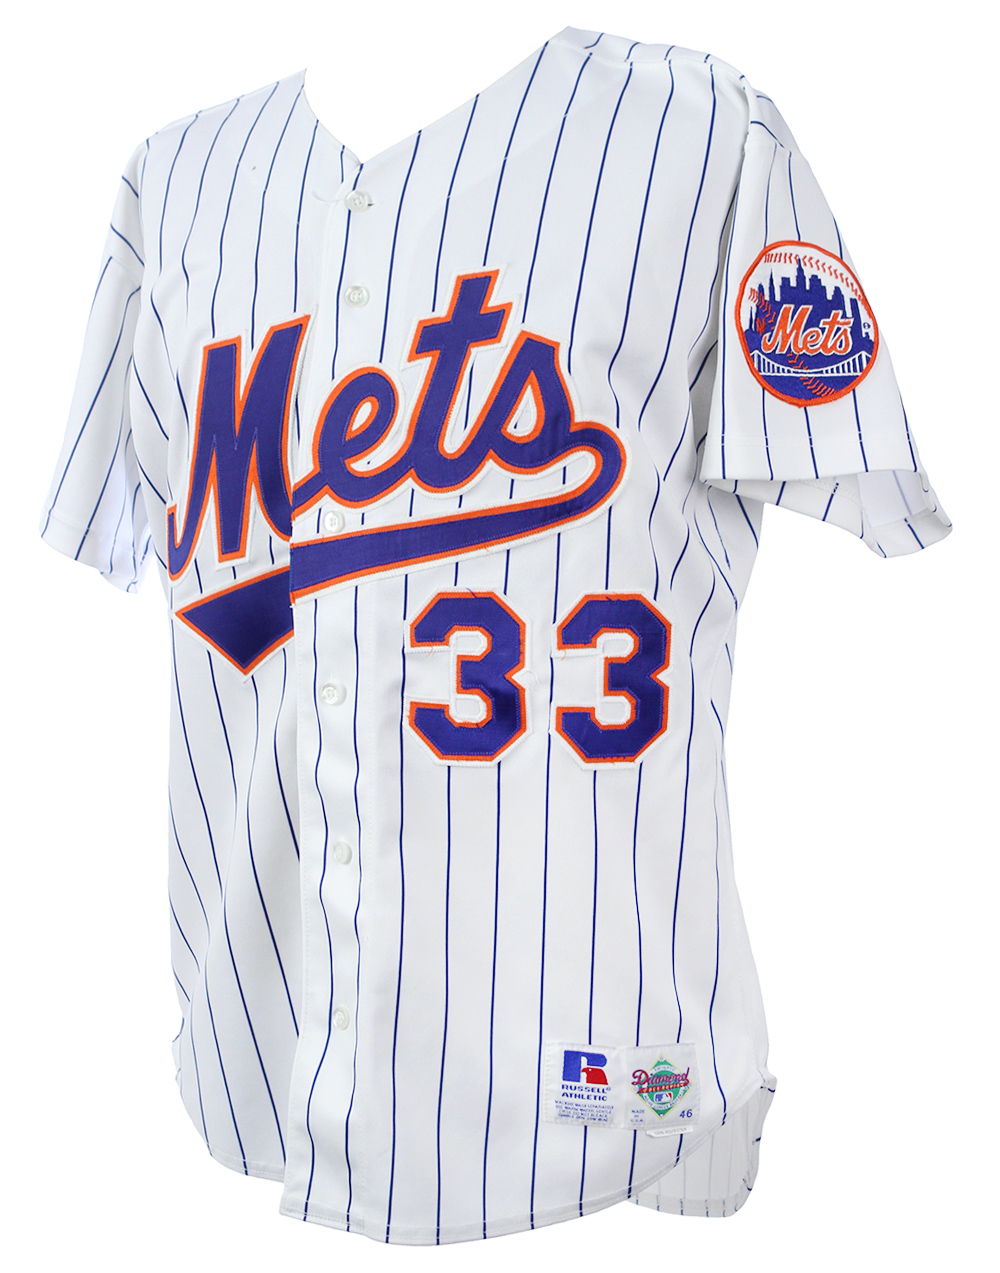 Circa 93 Eddie Murray Signed, Game Used New York Mets Jersey